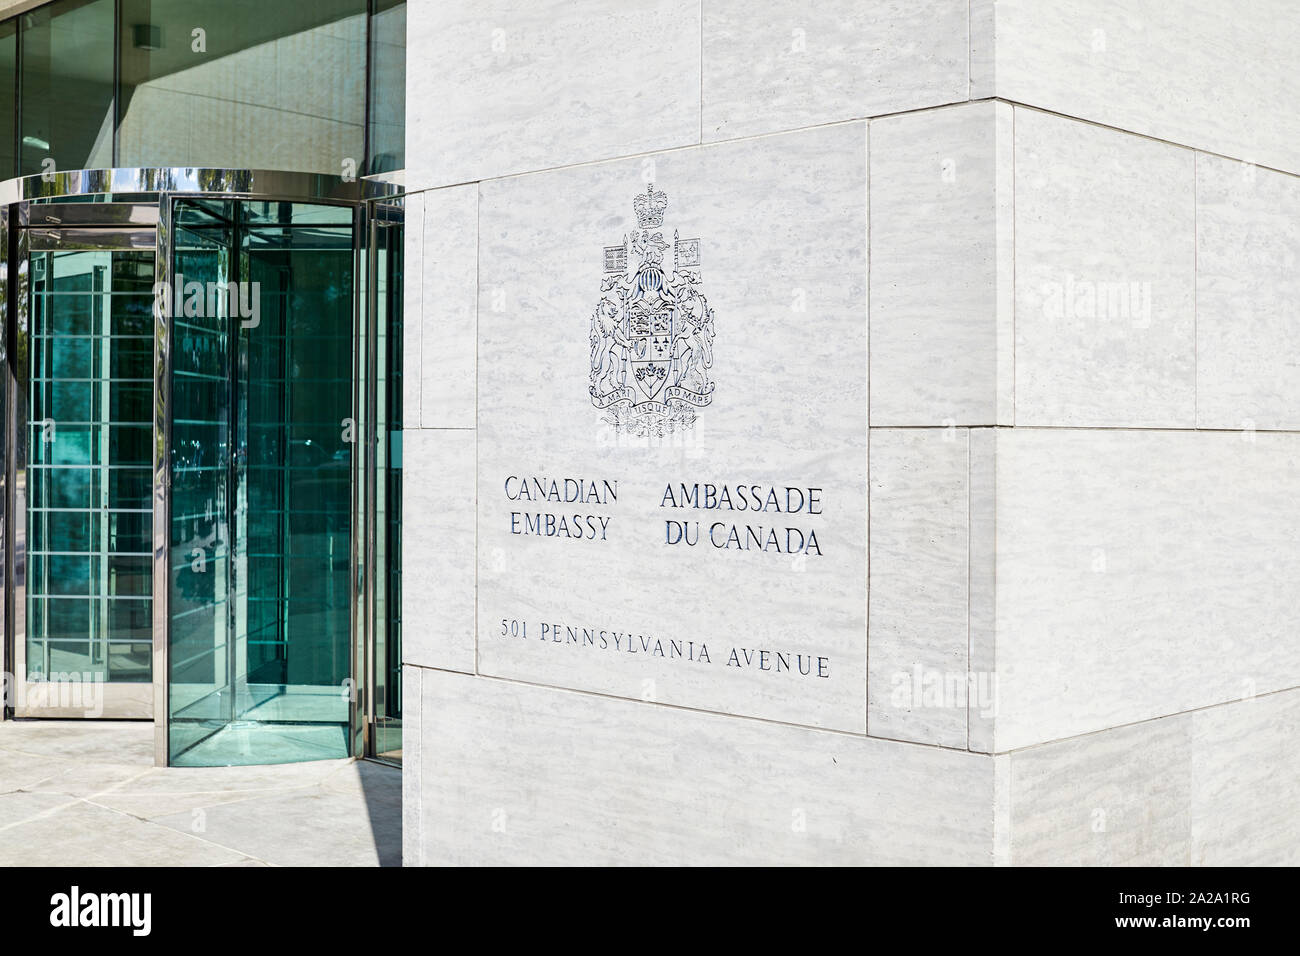 Washington DC, USA - September 18, 2019: Sign on the wall of the Canadian Embassy with revolving glass door entrance Stock Photo